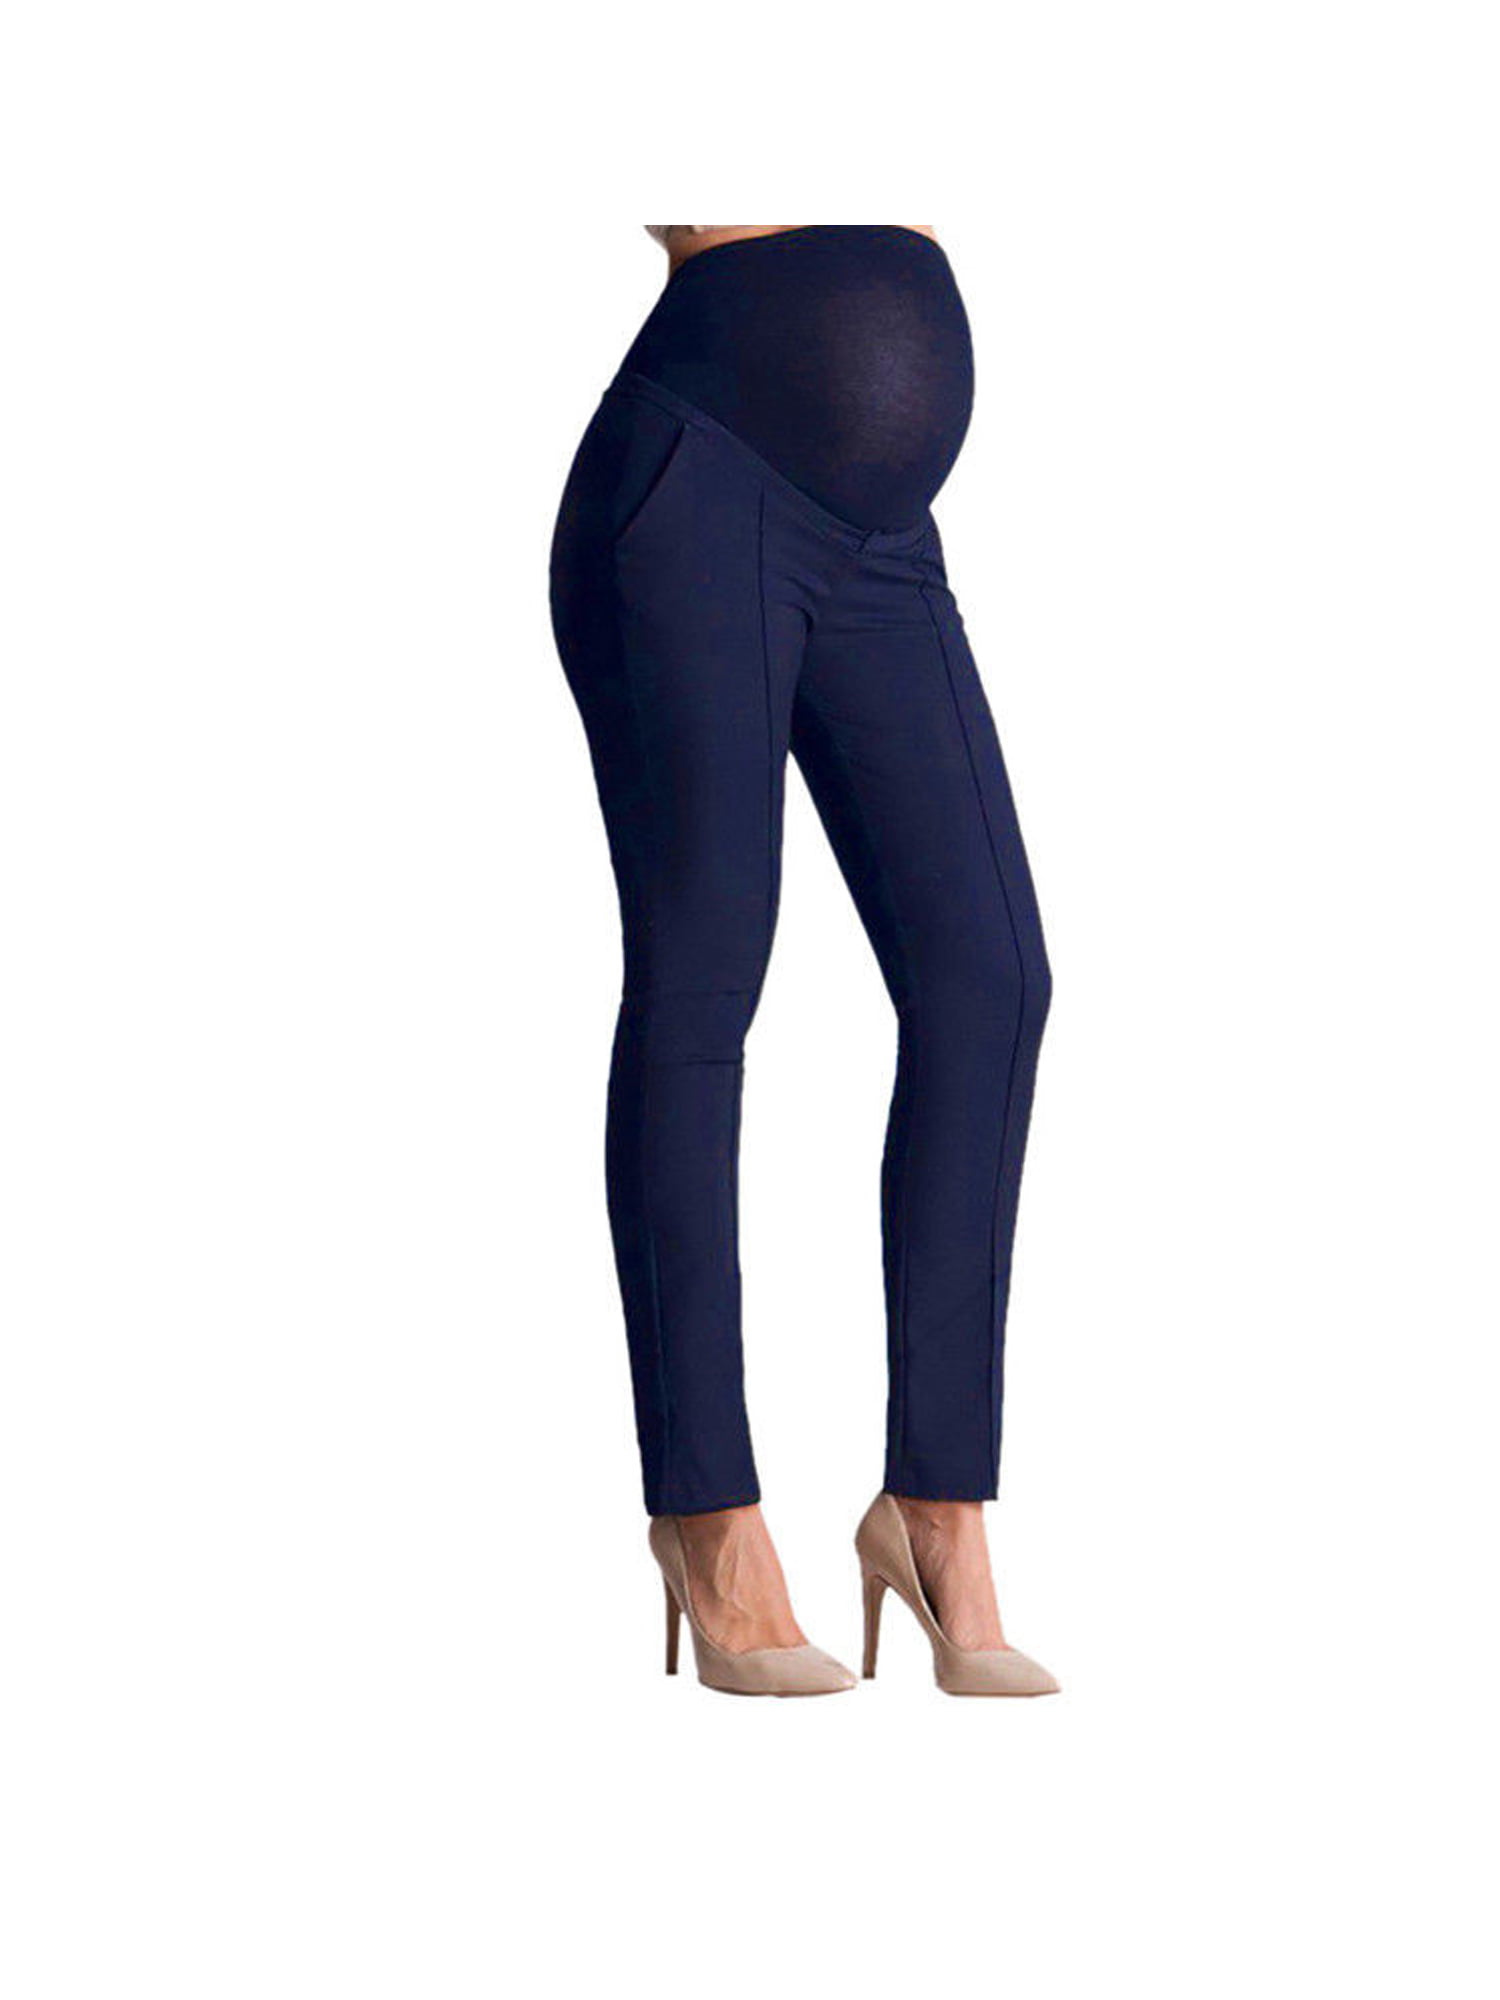 Licupiee Maternity Pants Pregnant Women High Waist Skinny Work Office Pant  Straight Leg Pants Ankle Pants Trousers